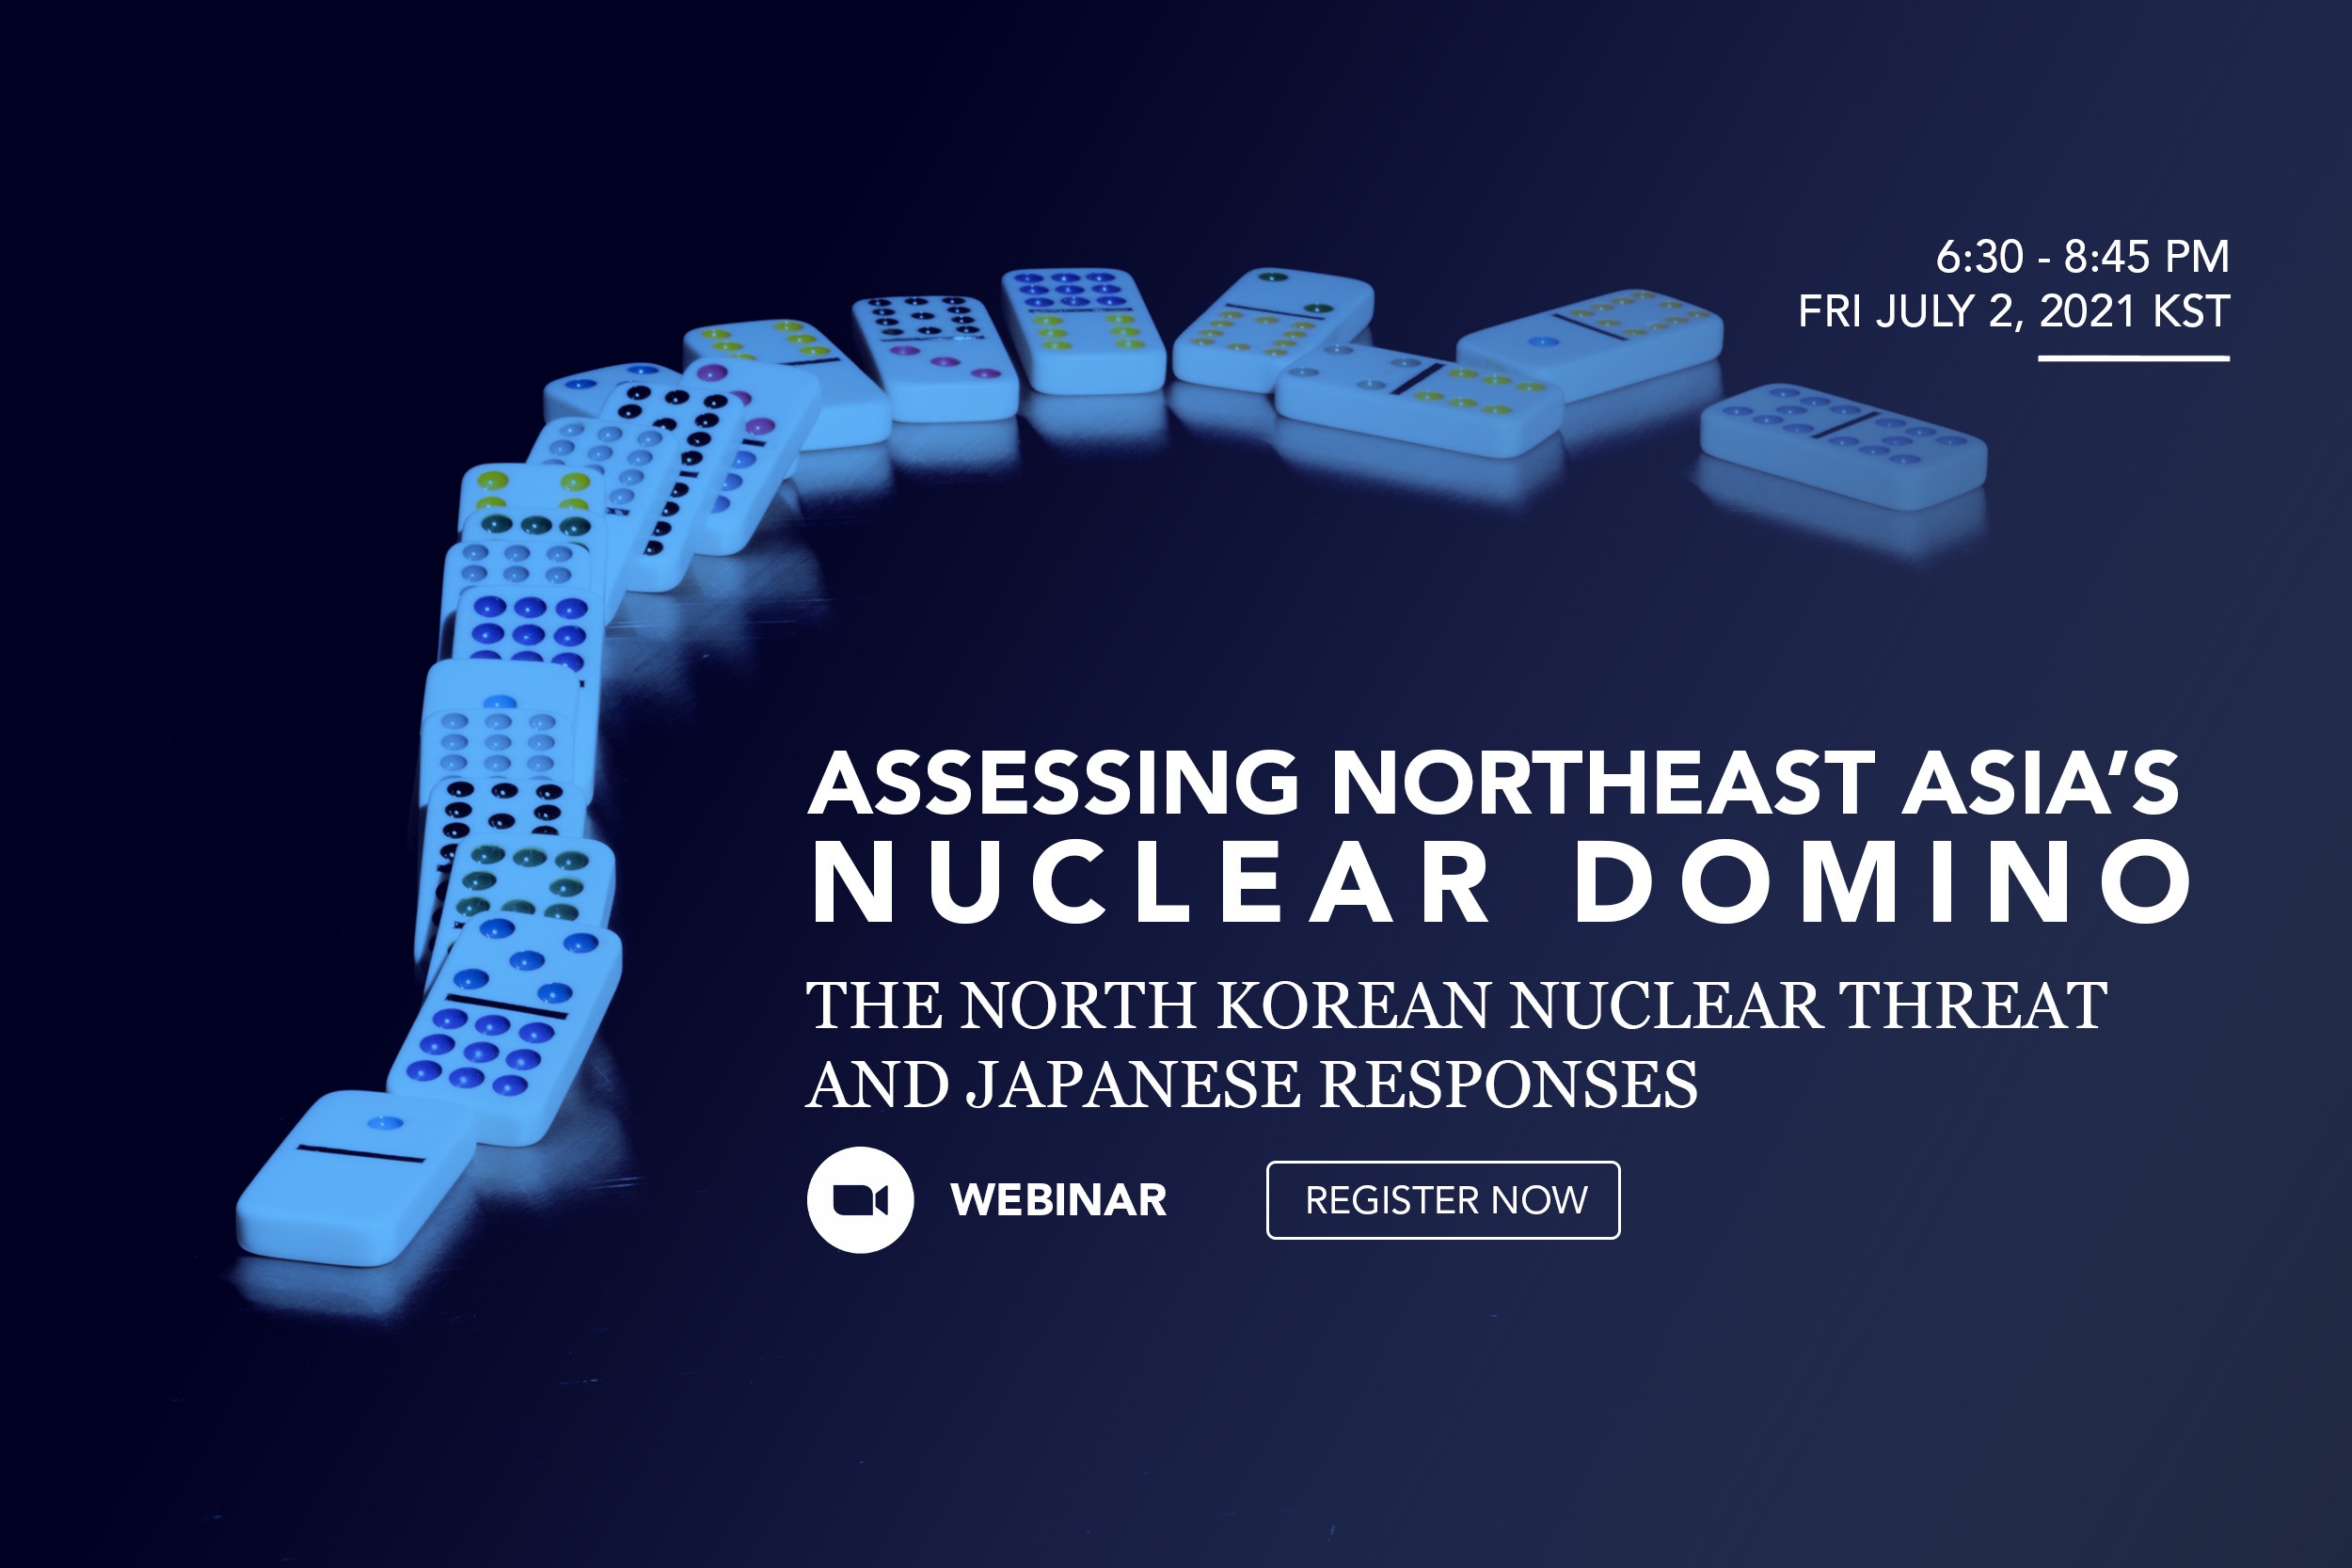 North Korean Nuclear Threat and Japanese Responses